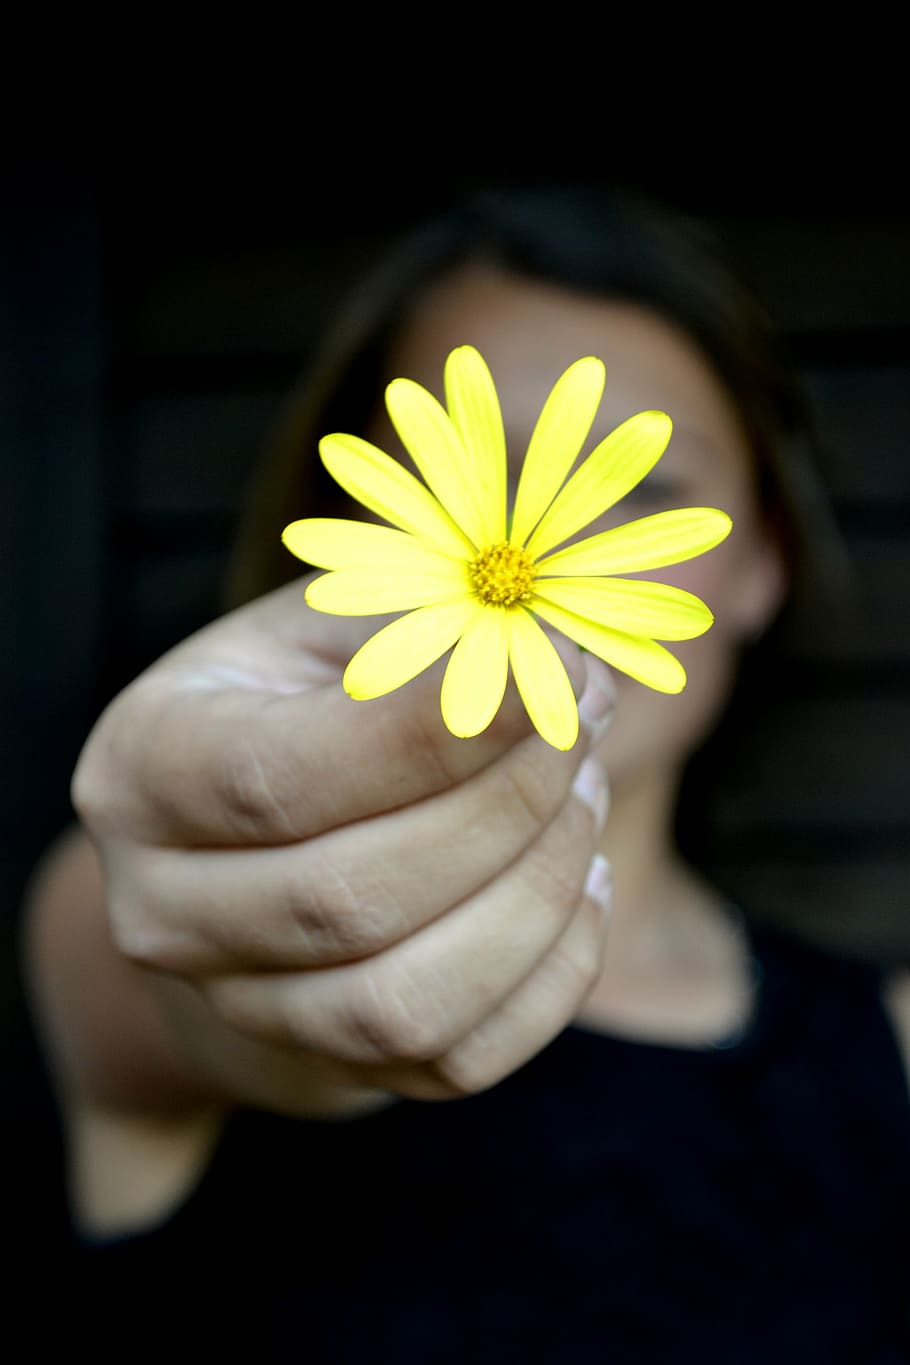 woman, holding, yellow, osteospermum flower, flower, daisy, peace, relaxation, hold, hand